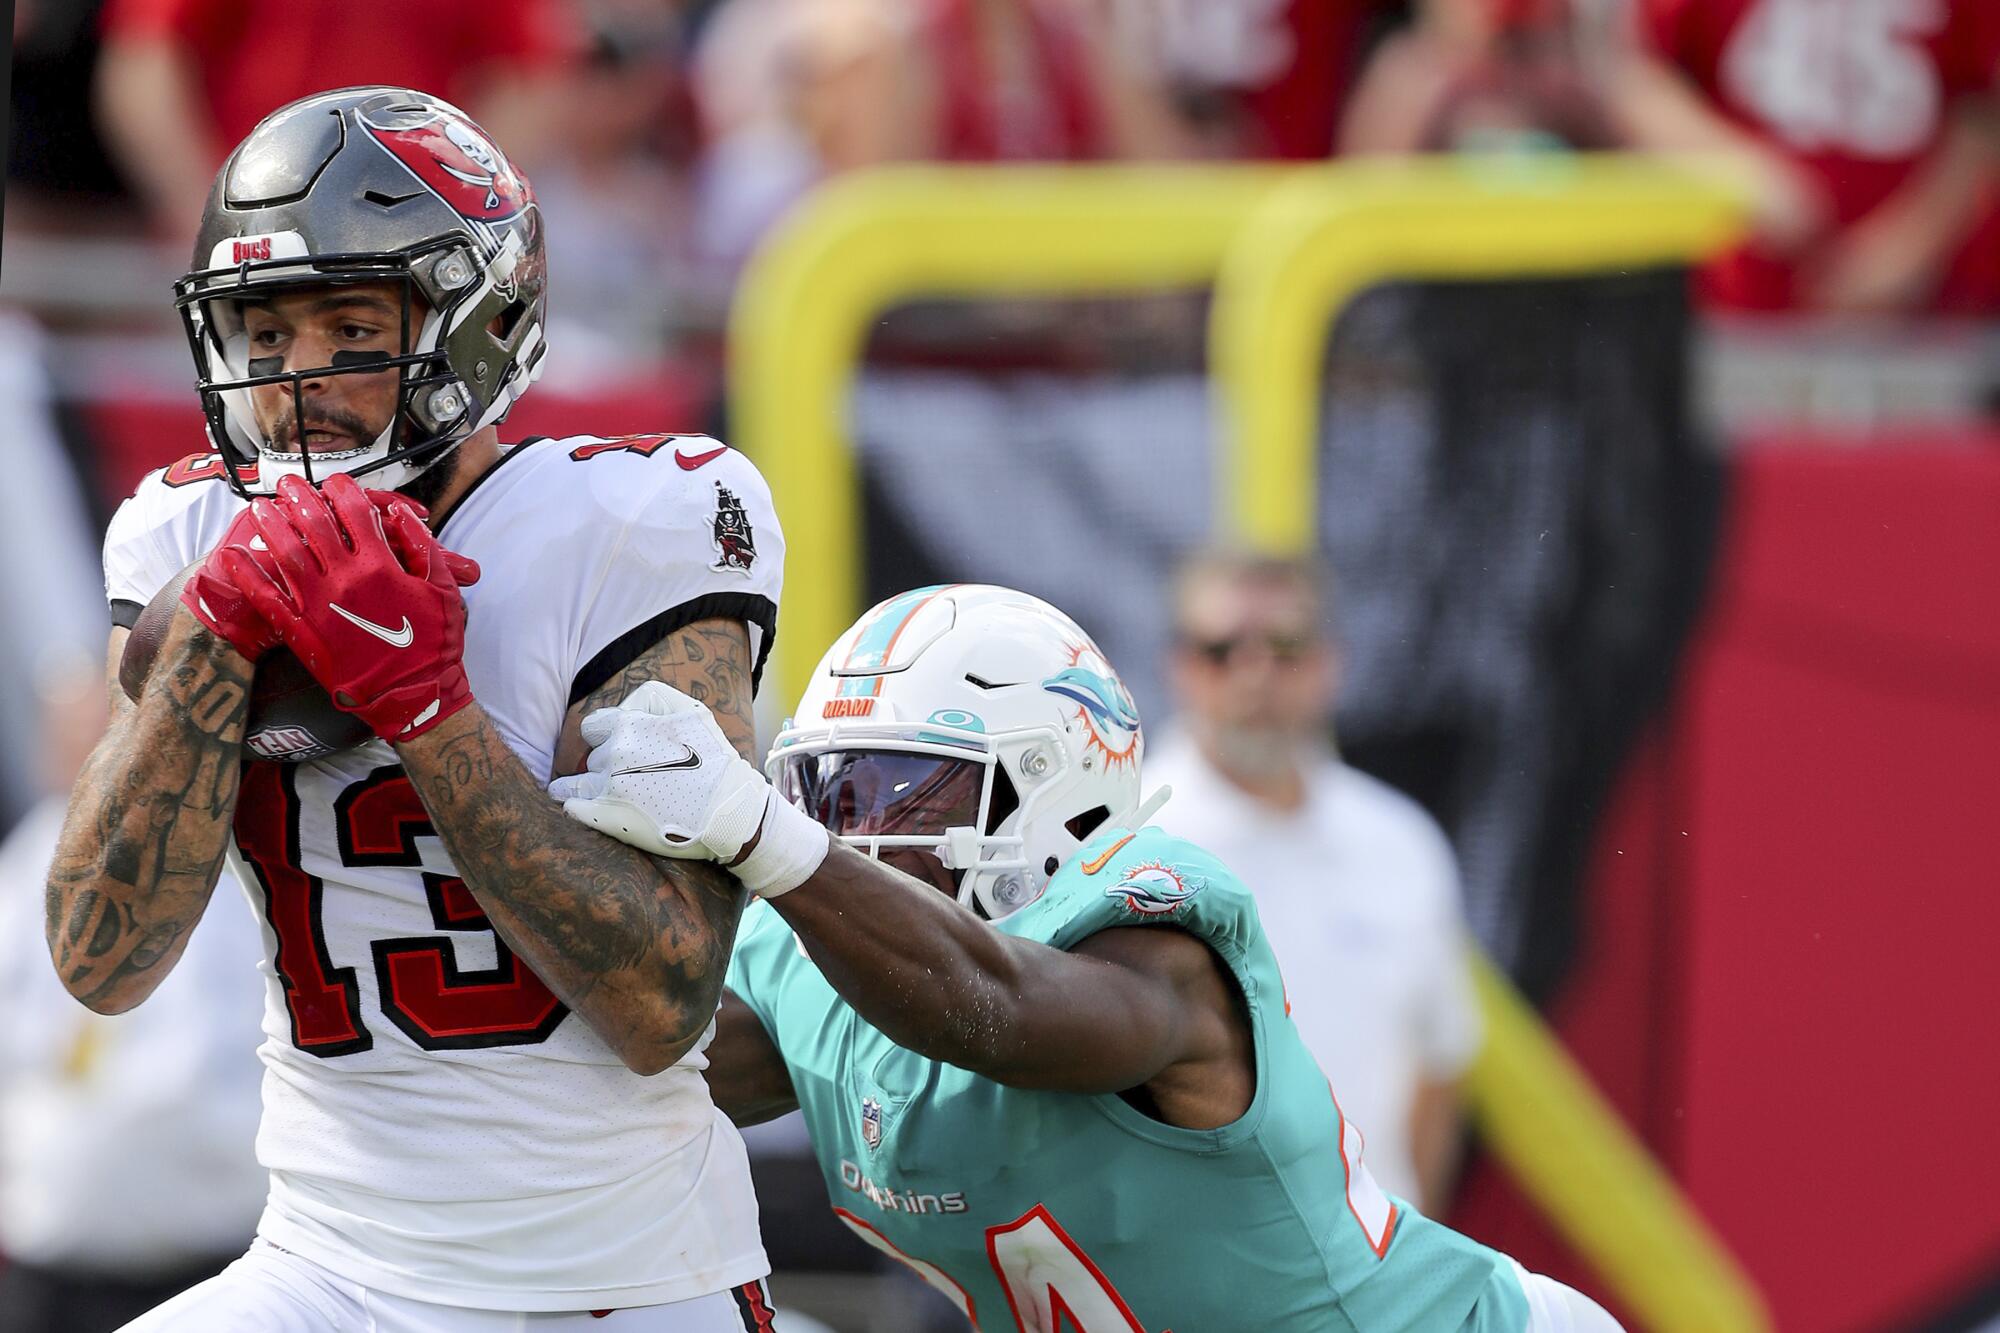 Tampa Bay Buccaneers wide receiver Mike Evans makes a touchdown reception in front of Miami Dolphins cornerback Byron Jones.